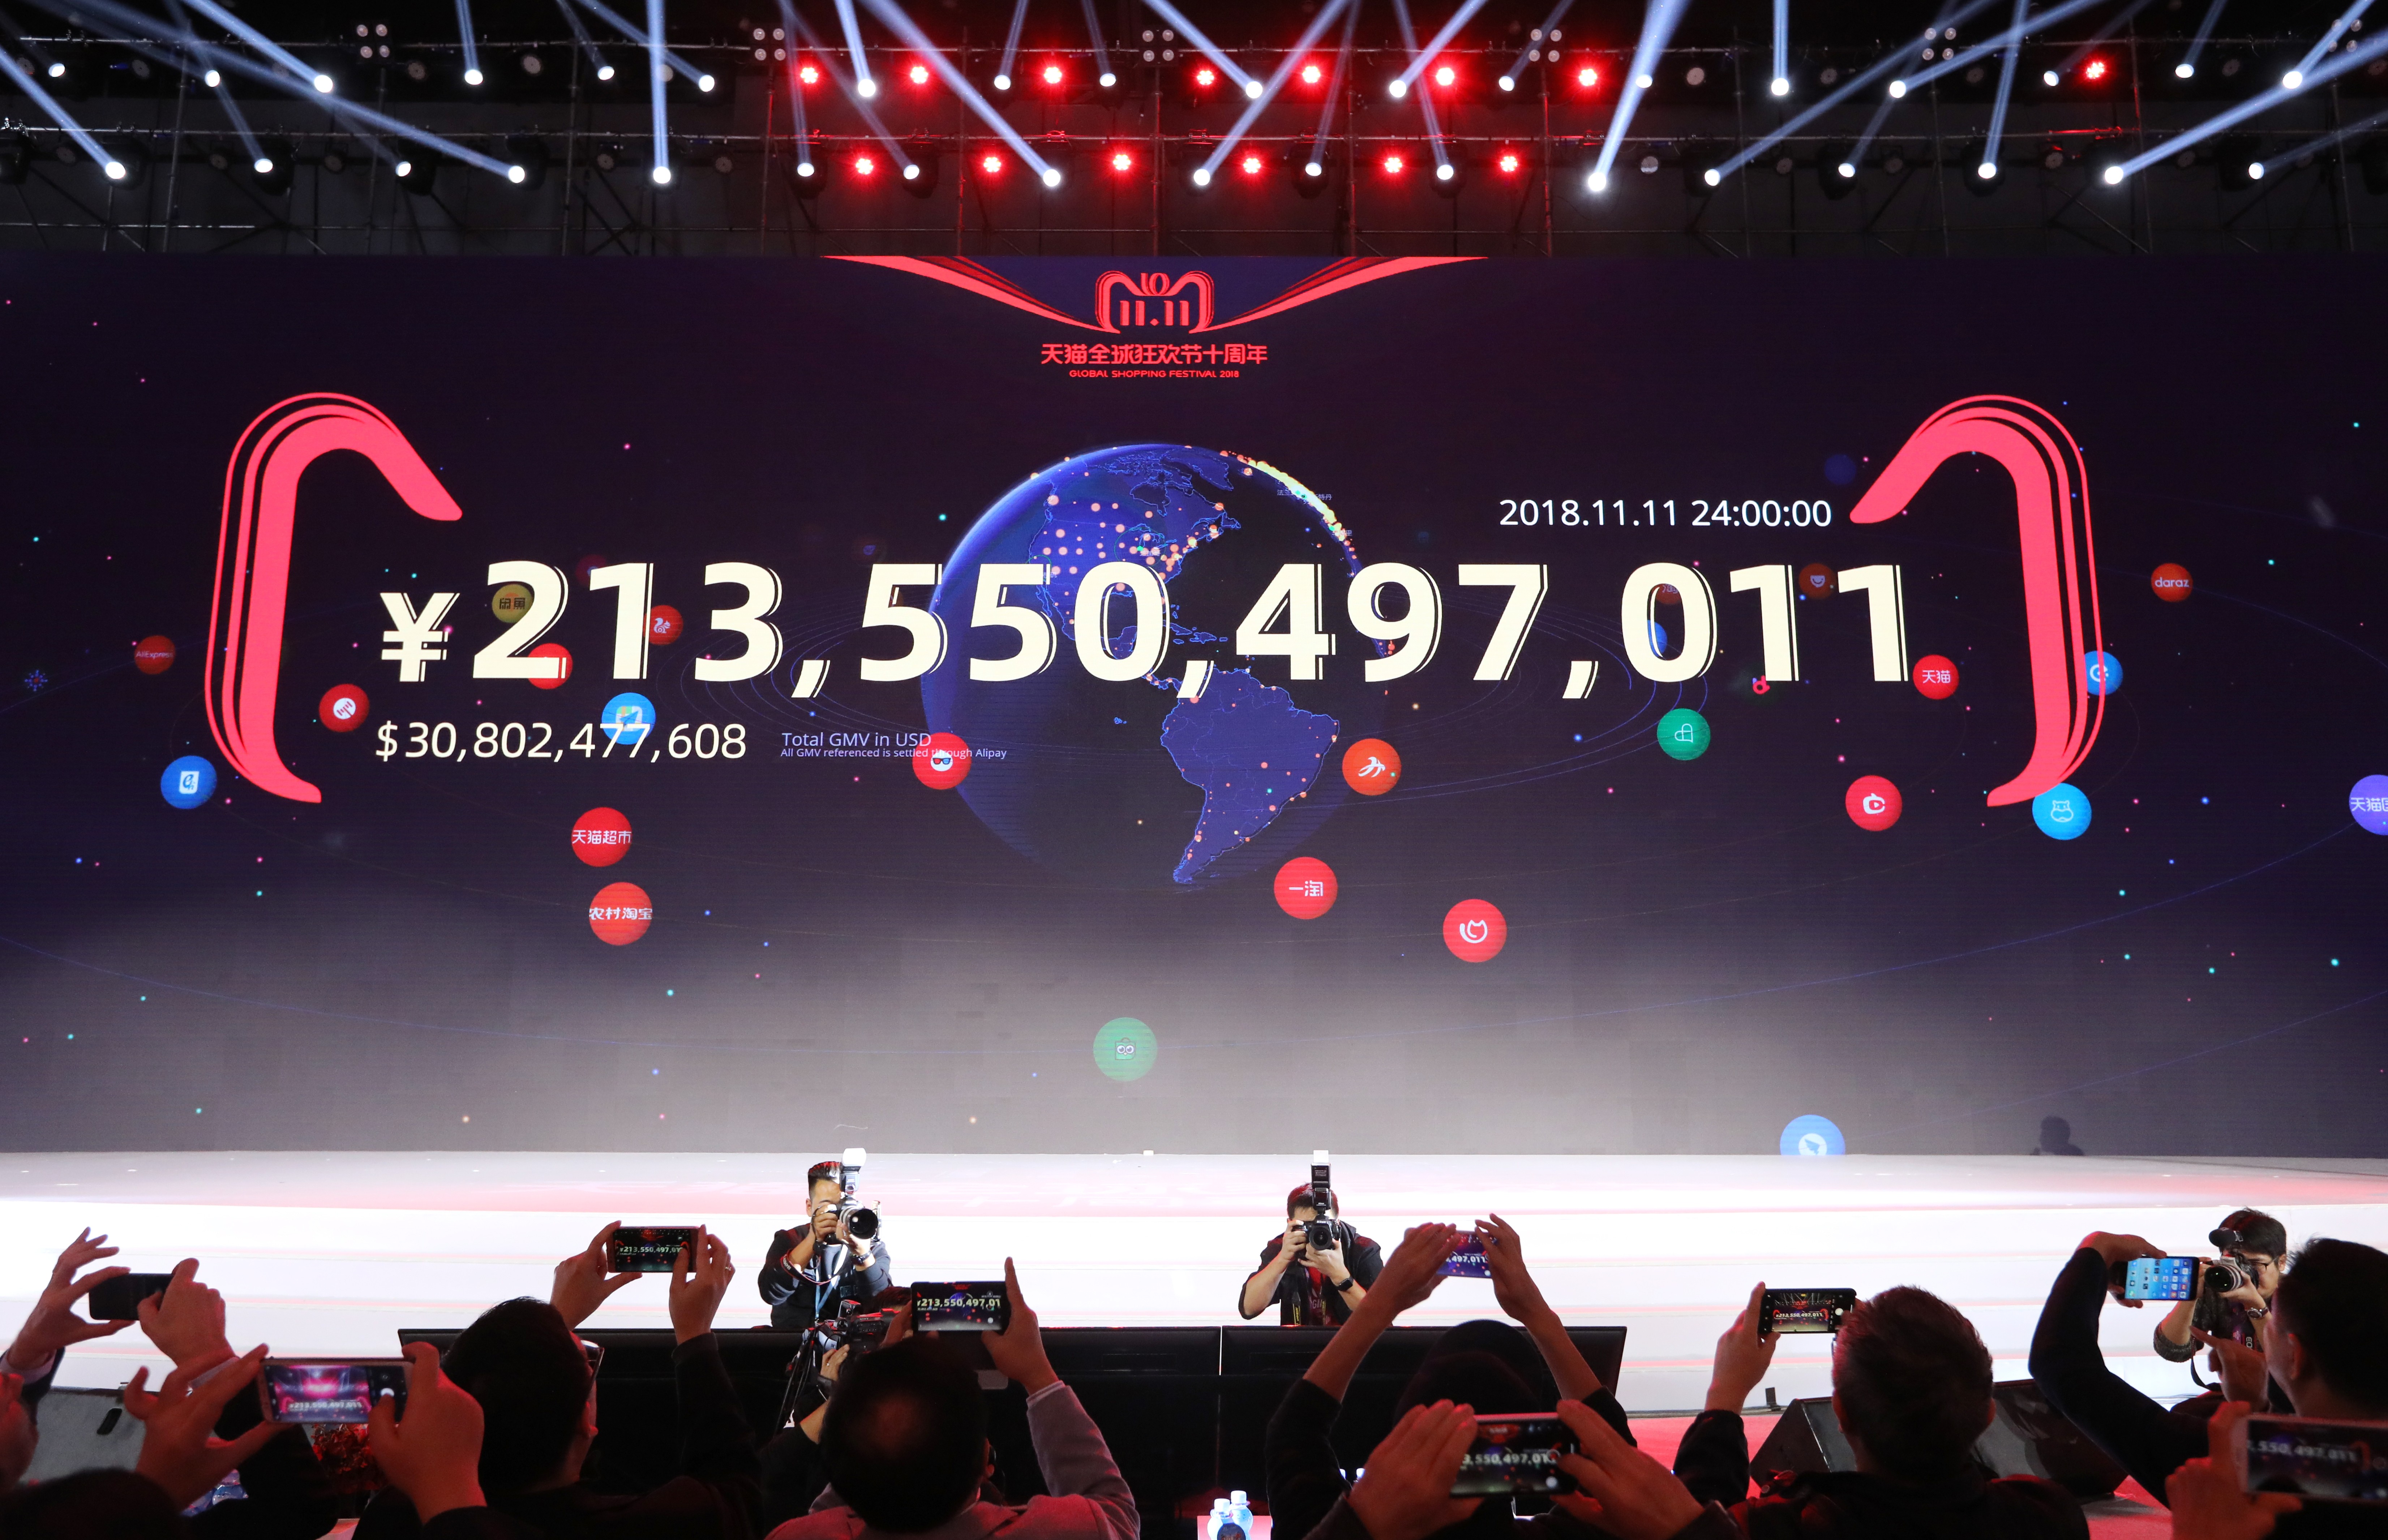 The total figure spent is displayed on the big screen in Shanghai during the 11.11 Global Shopping Festival in 2018, when a new record was set – and is likely to be broken in 2019. Photo: Simon Song